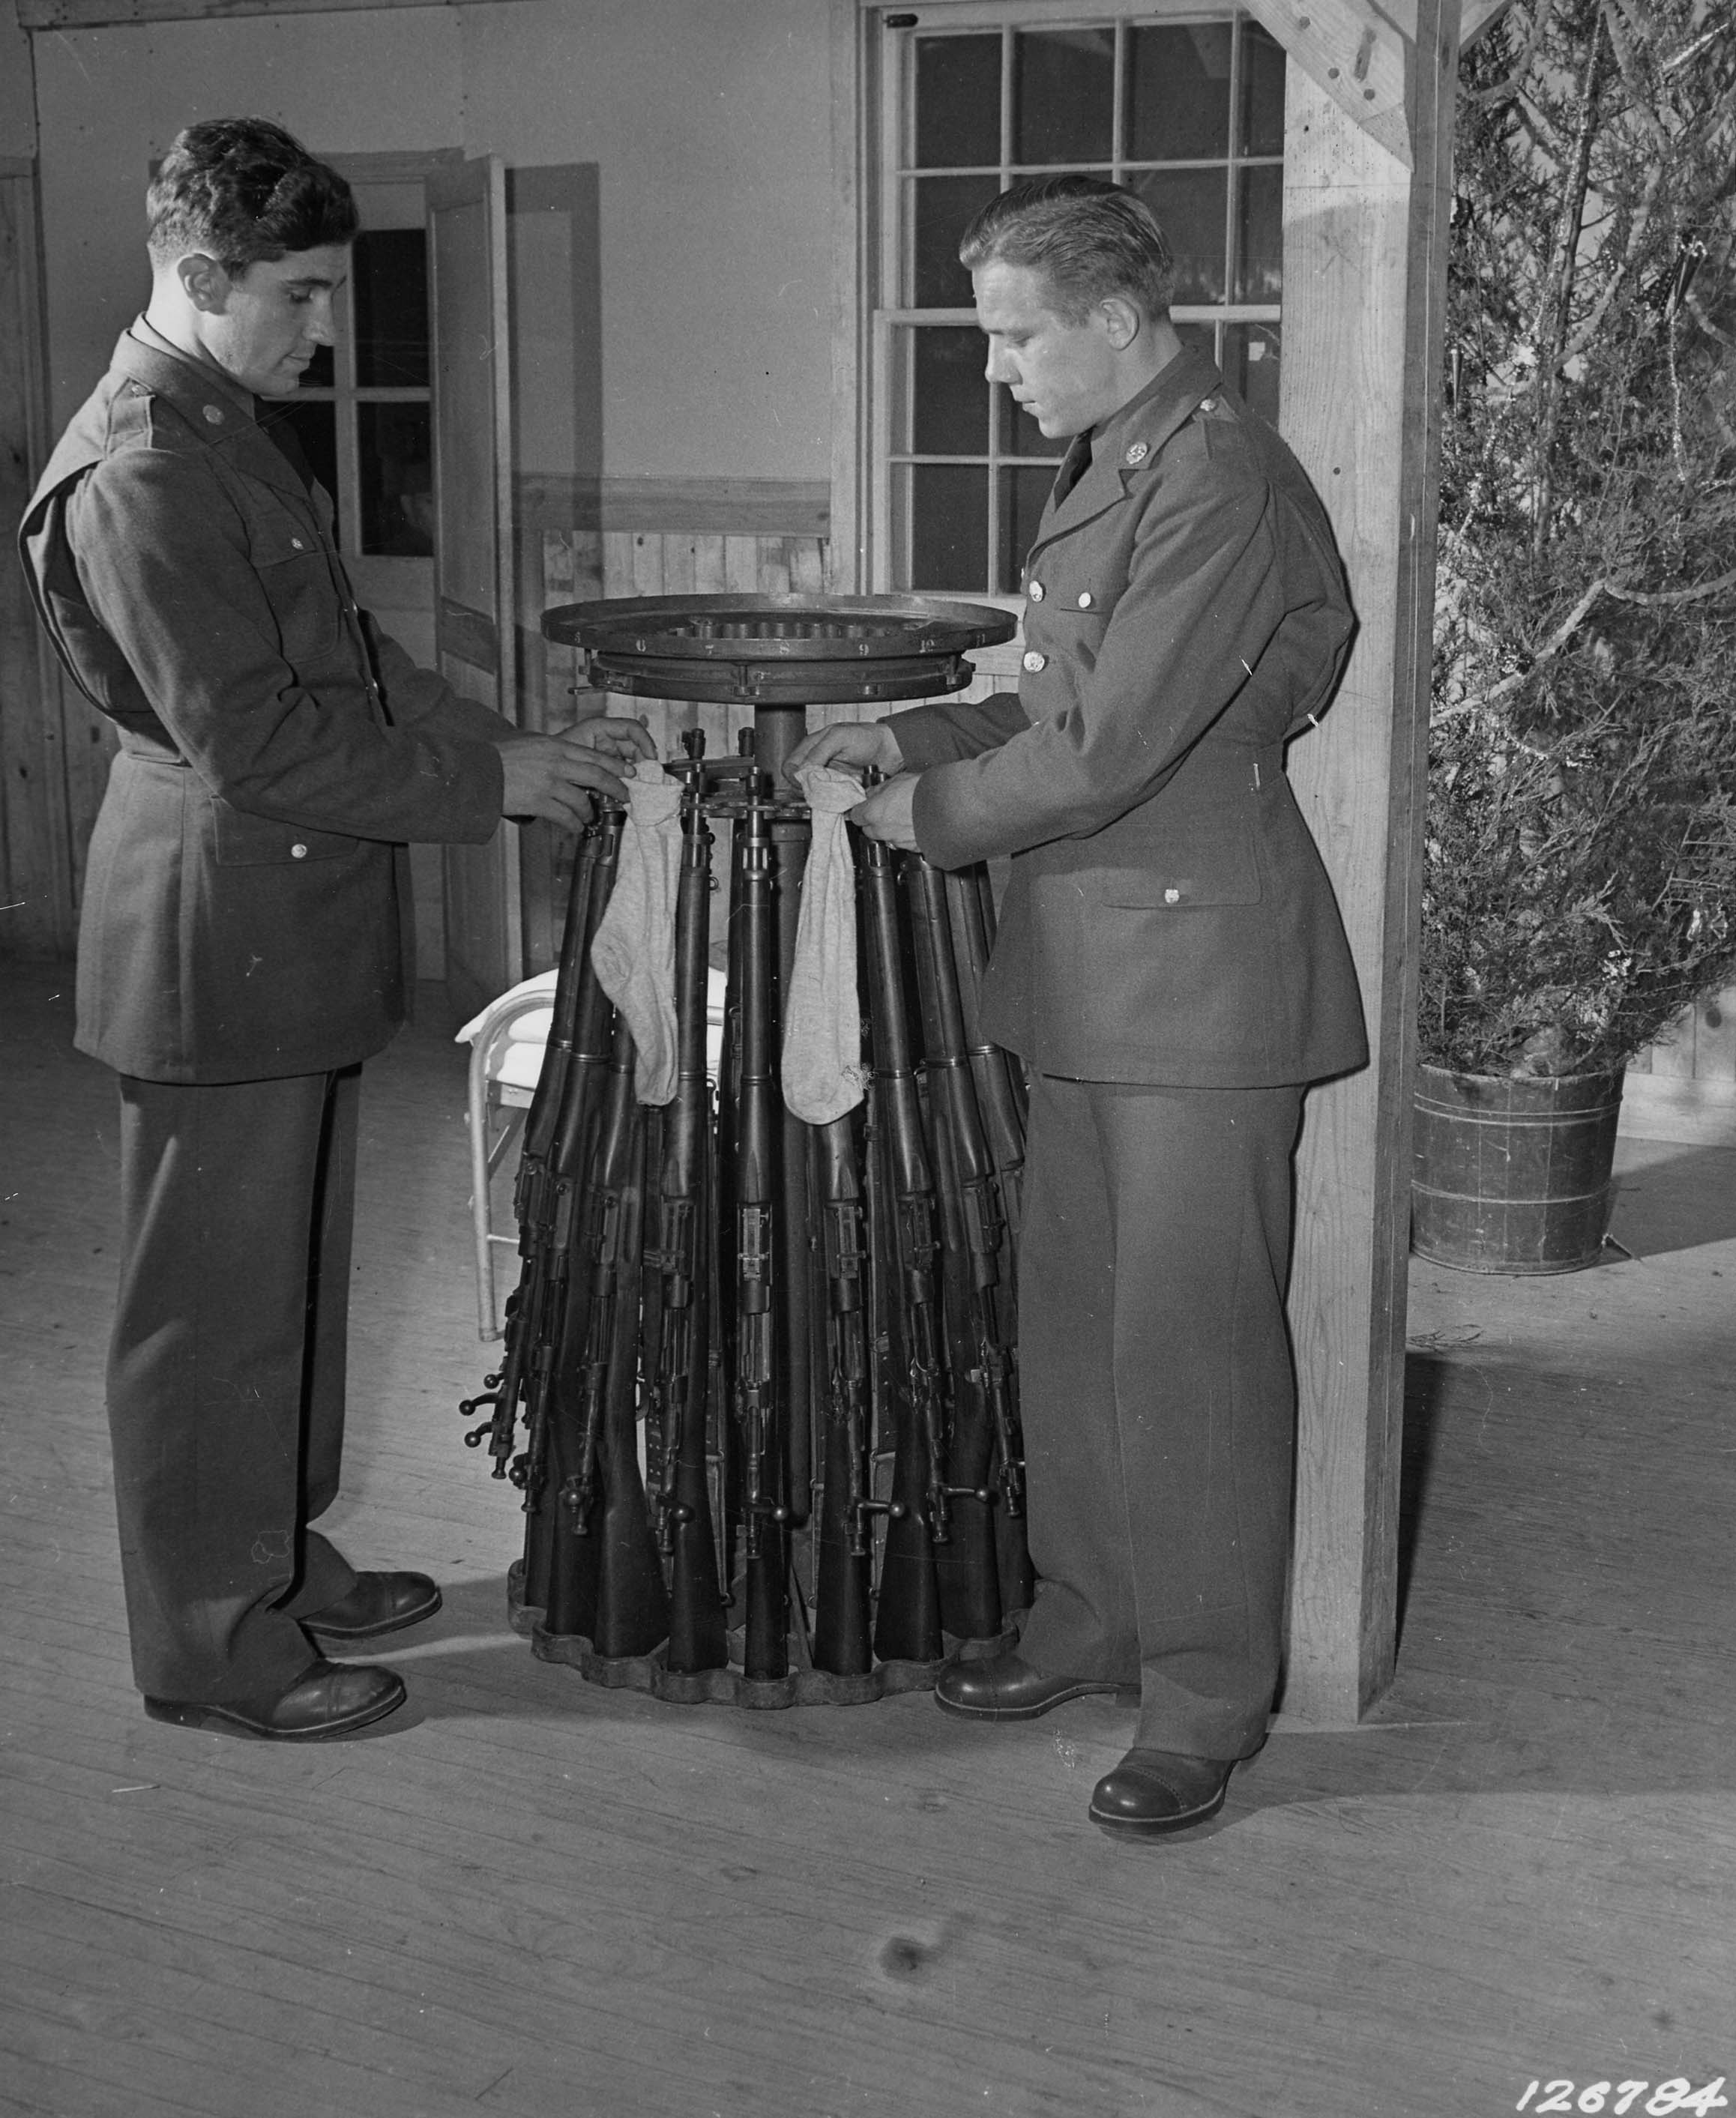 US Army Privates Kotula and Queen hanging stockings on Springfield M1903 rifles for the Christmas season, Camp Lee, Virginia, United States, Dec 1941